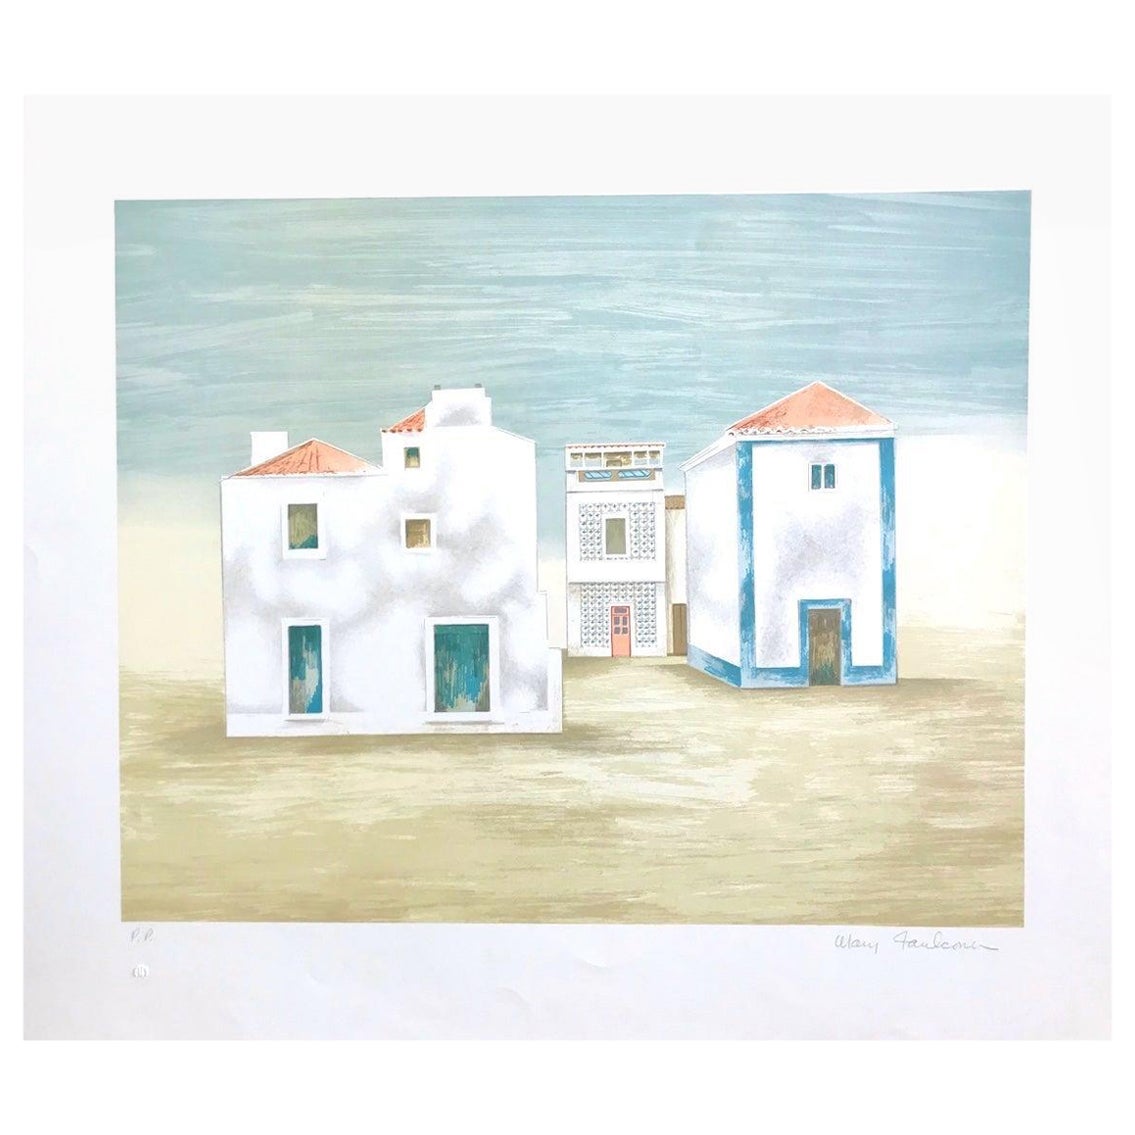 Mary Faulconer Print - ALGARVE LANDSCAPE Signed Lithograph, Minimalist White Houses, Blue, Beige, Gray